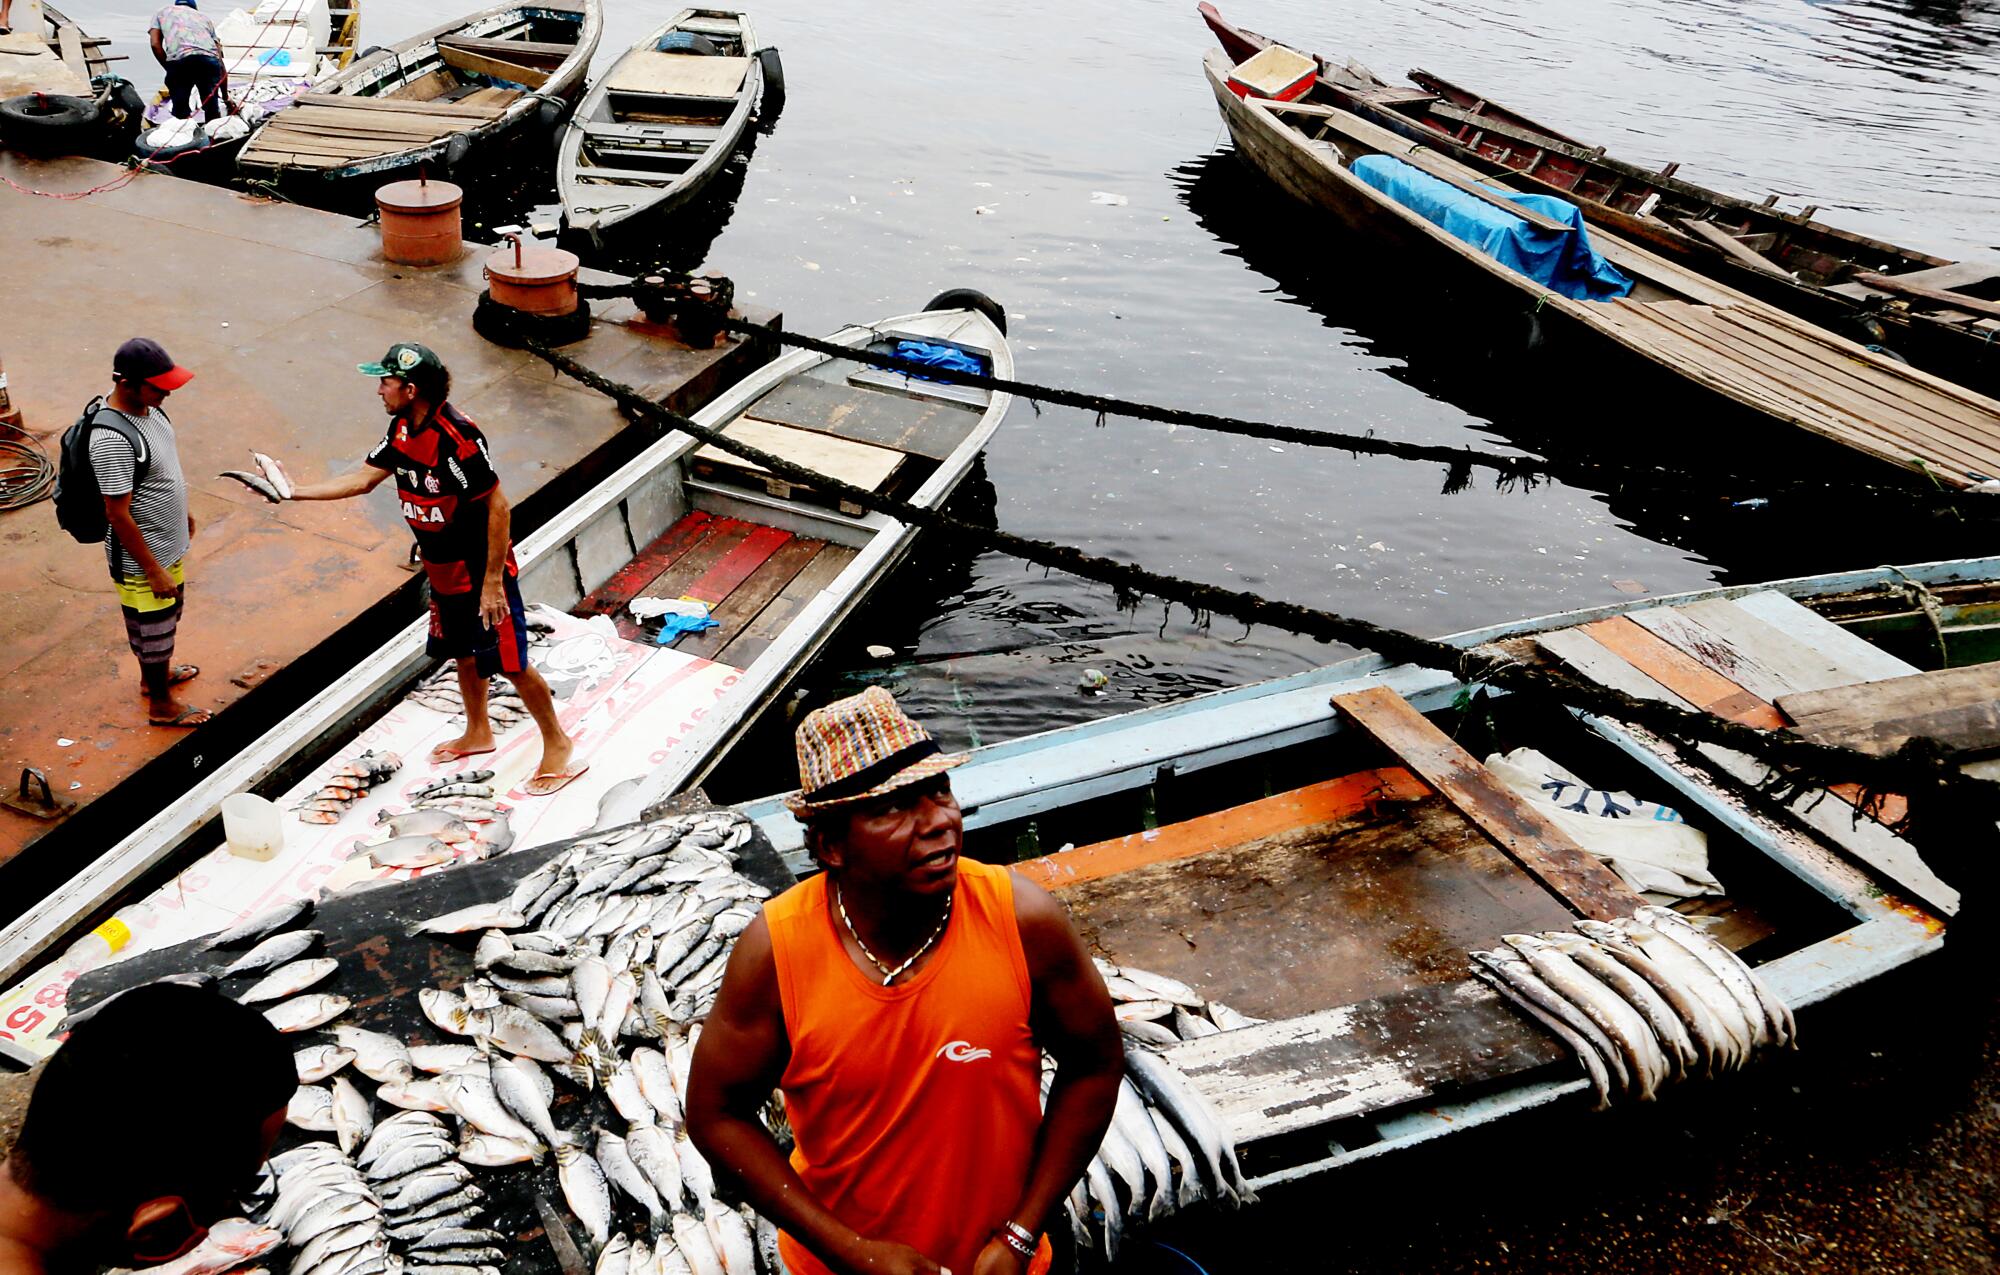 A man stands next to a boat with fish for sale  